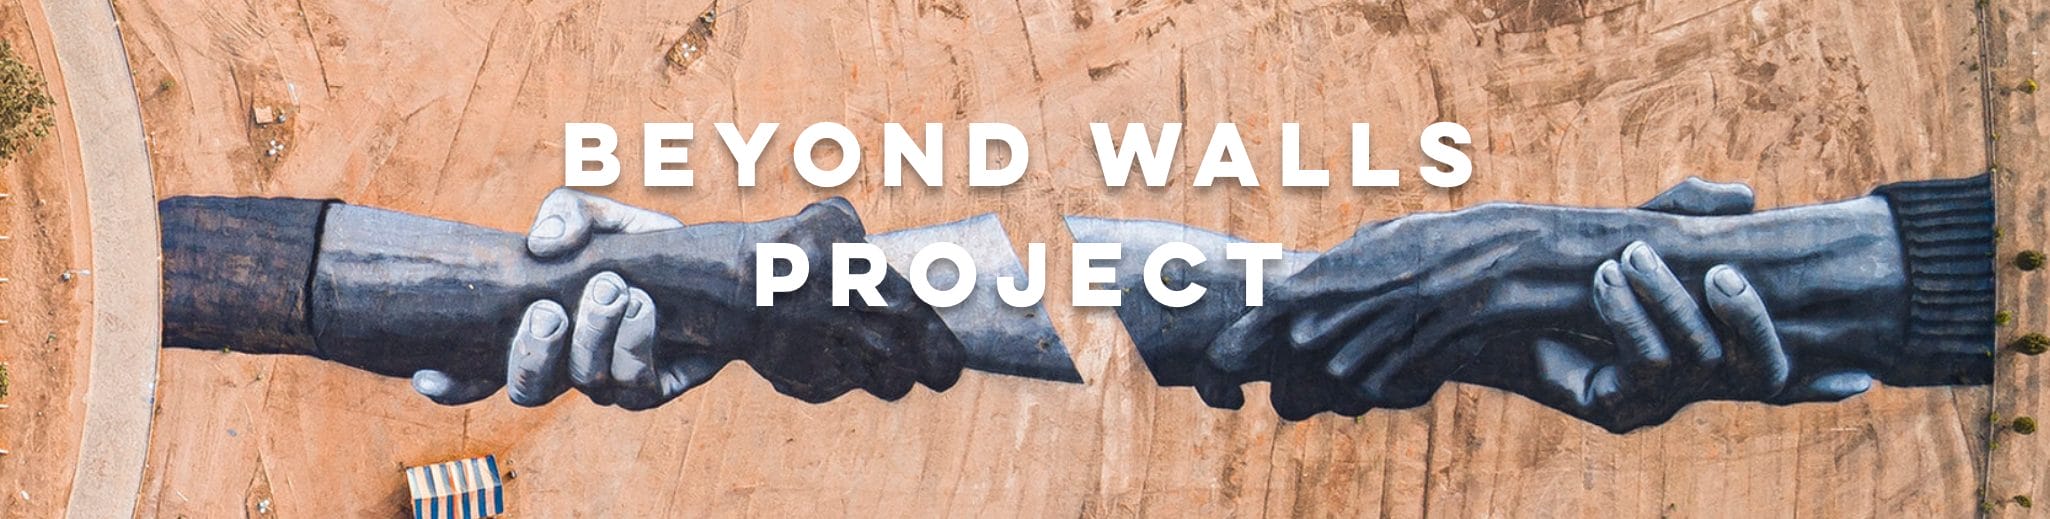 Beyond Walls Project saype